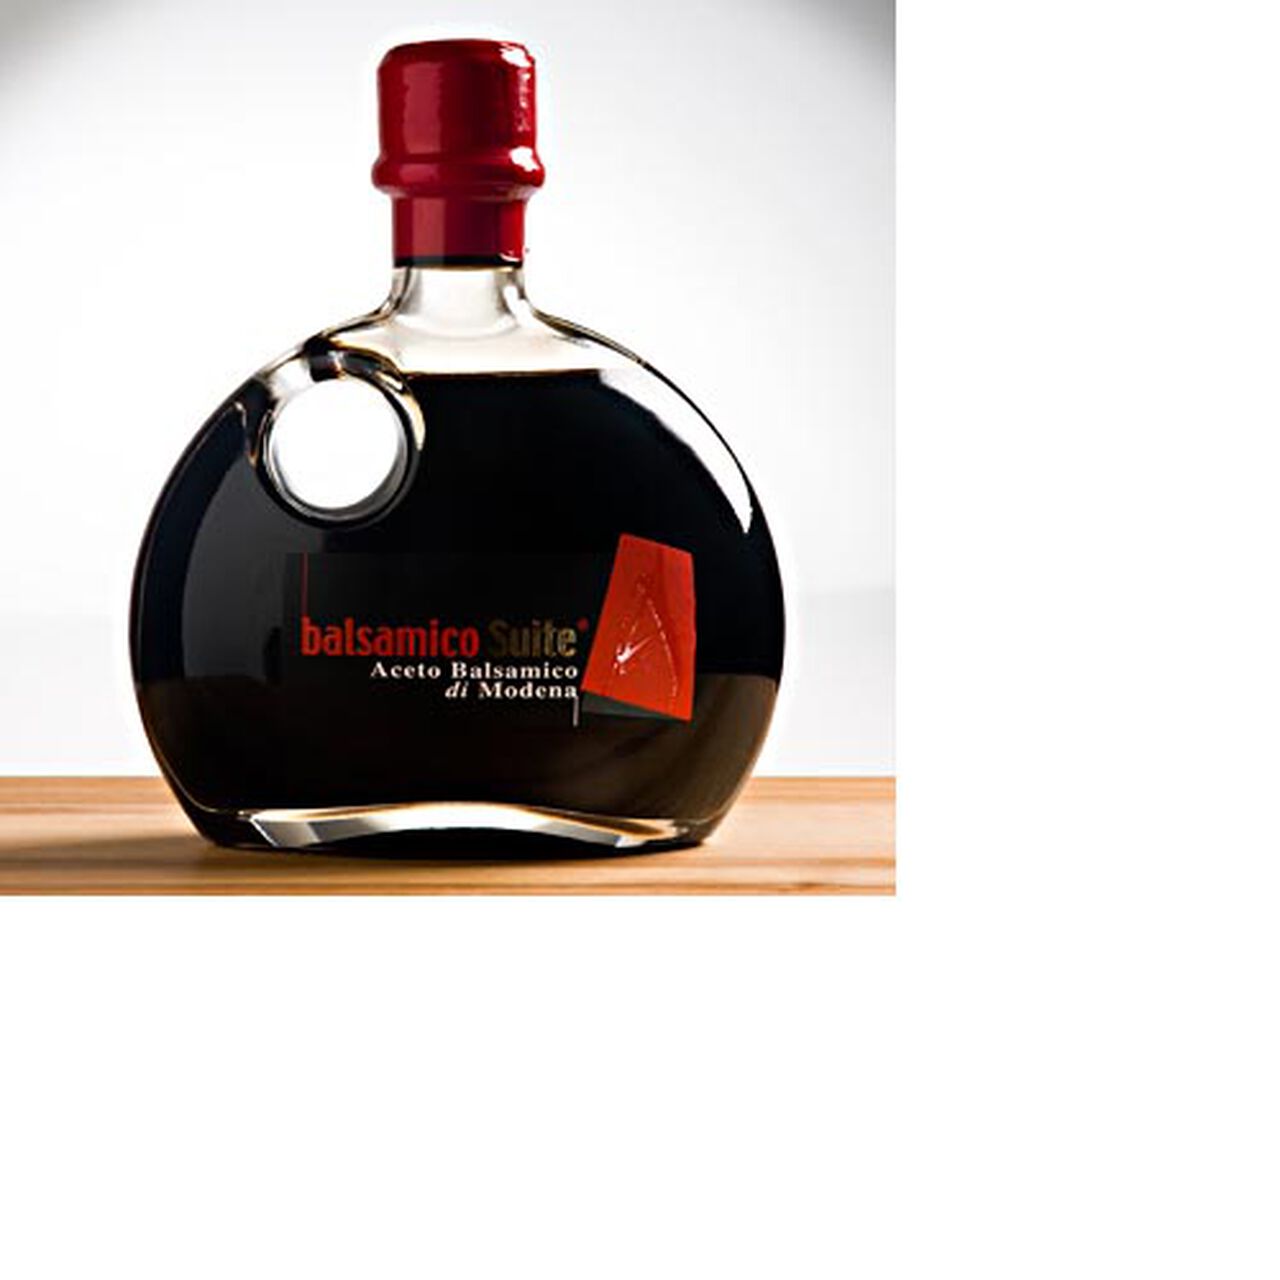 Balsamico Suite Aceto Balsamico di Modena - 8.5oz, , large image number 0